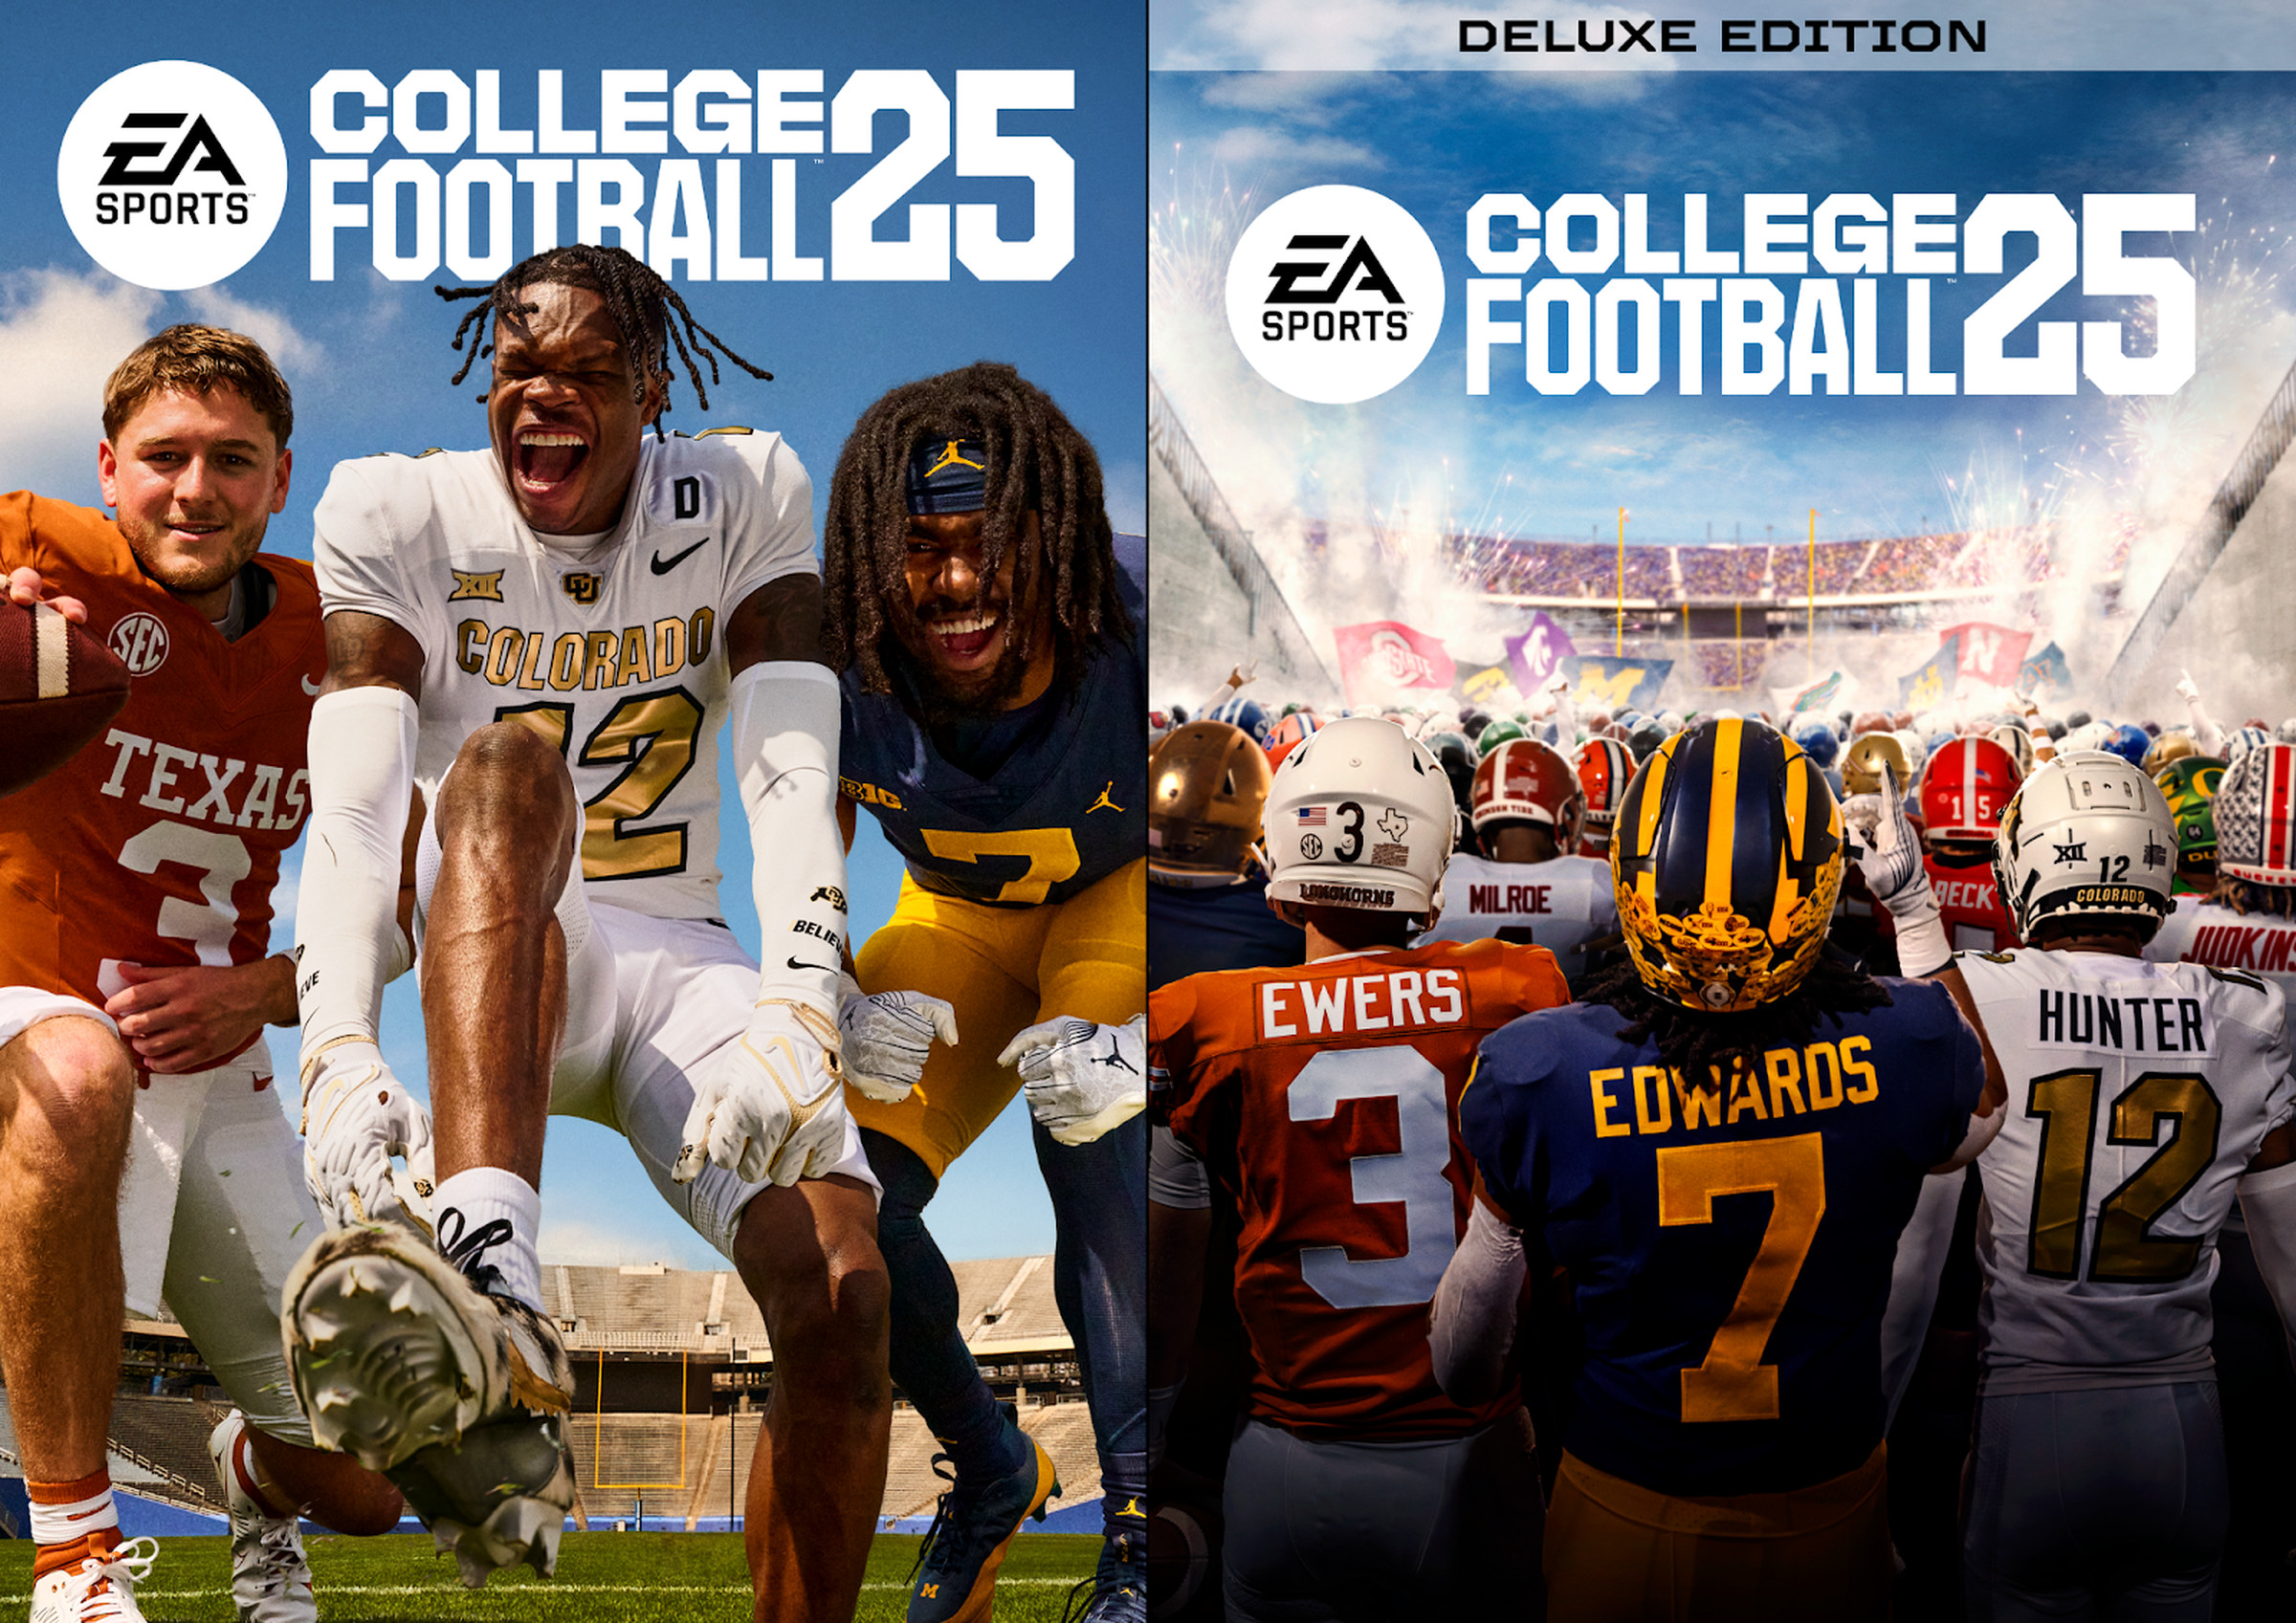 Cover art for two editions of the EA Sports College Football 25 game showing Michigan running back Donovan Edwards, Texas quarterback Quinn Ewers, and Colorado wide receiver/defensive back Travis Hunter.